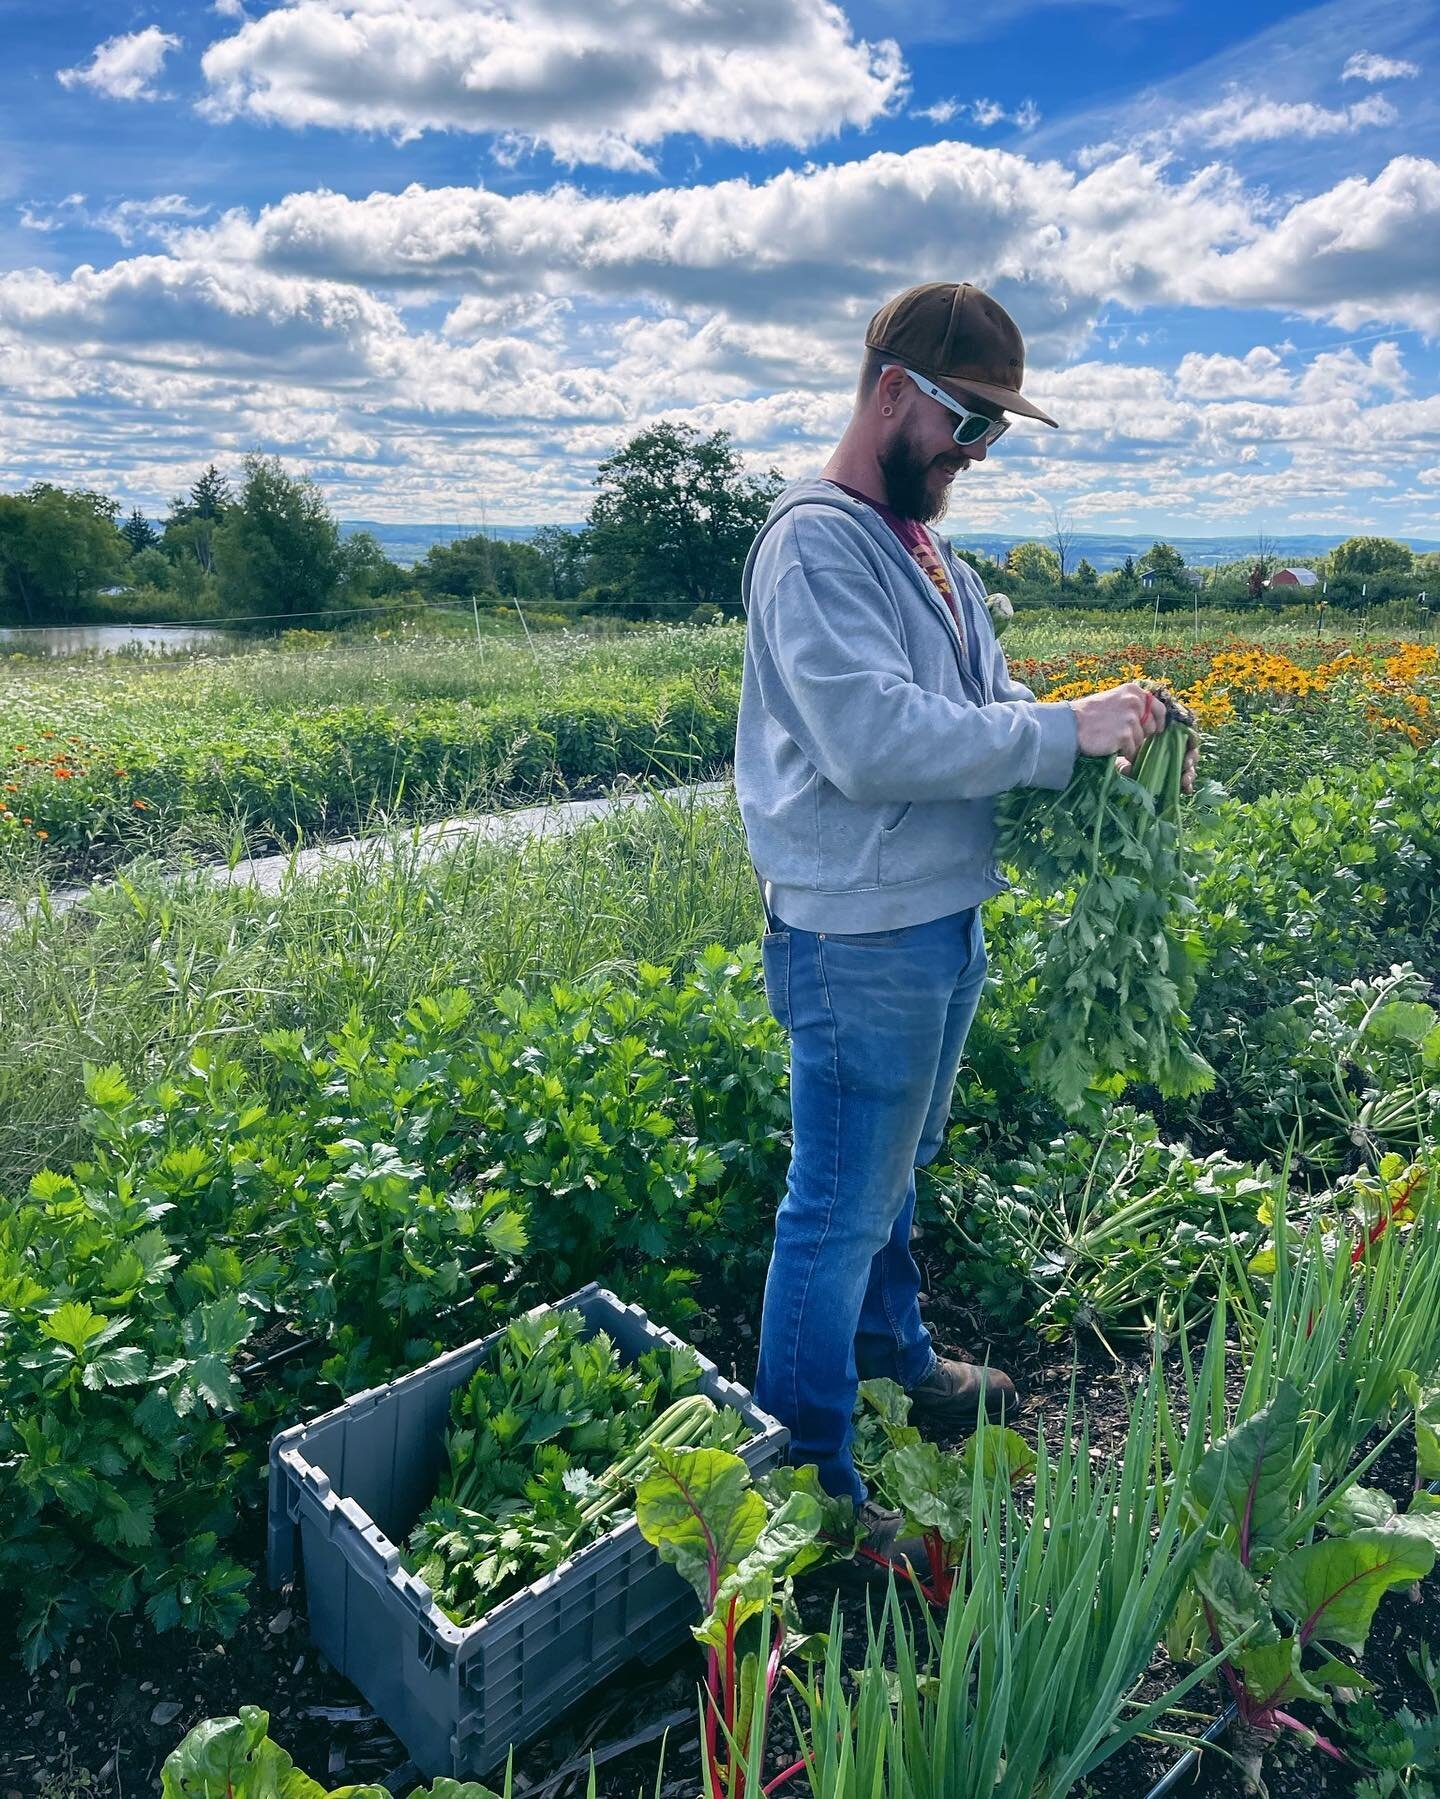 Join our team! We are looking for a full-time Farmhand. 🧑&zwj;🌾

This position entails some of the following: sowing seeds, transplanting, maintaining raised field beds, cultivation by hand, trellising, harvesting by hand, and working the Thursday 